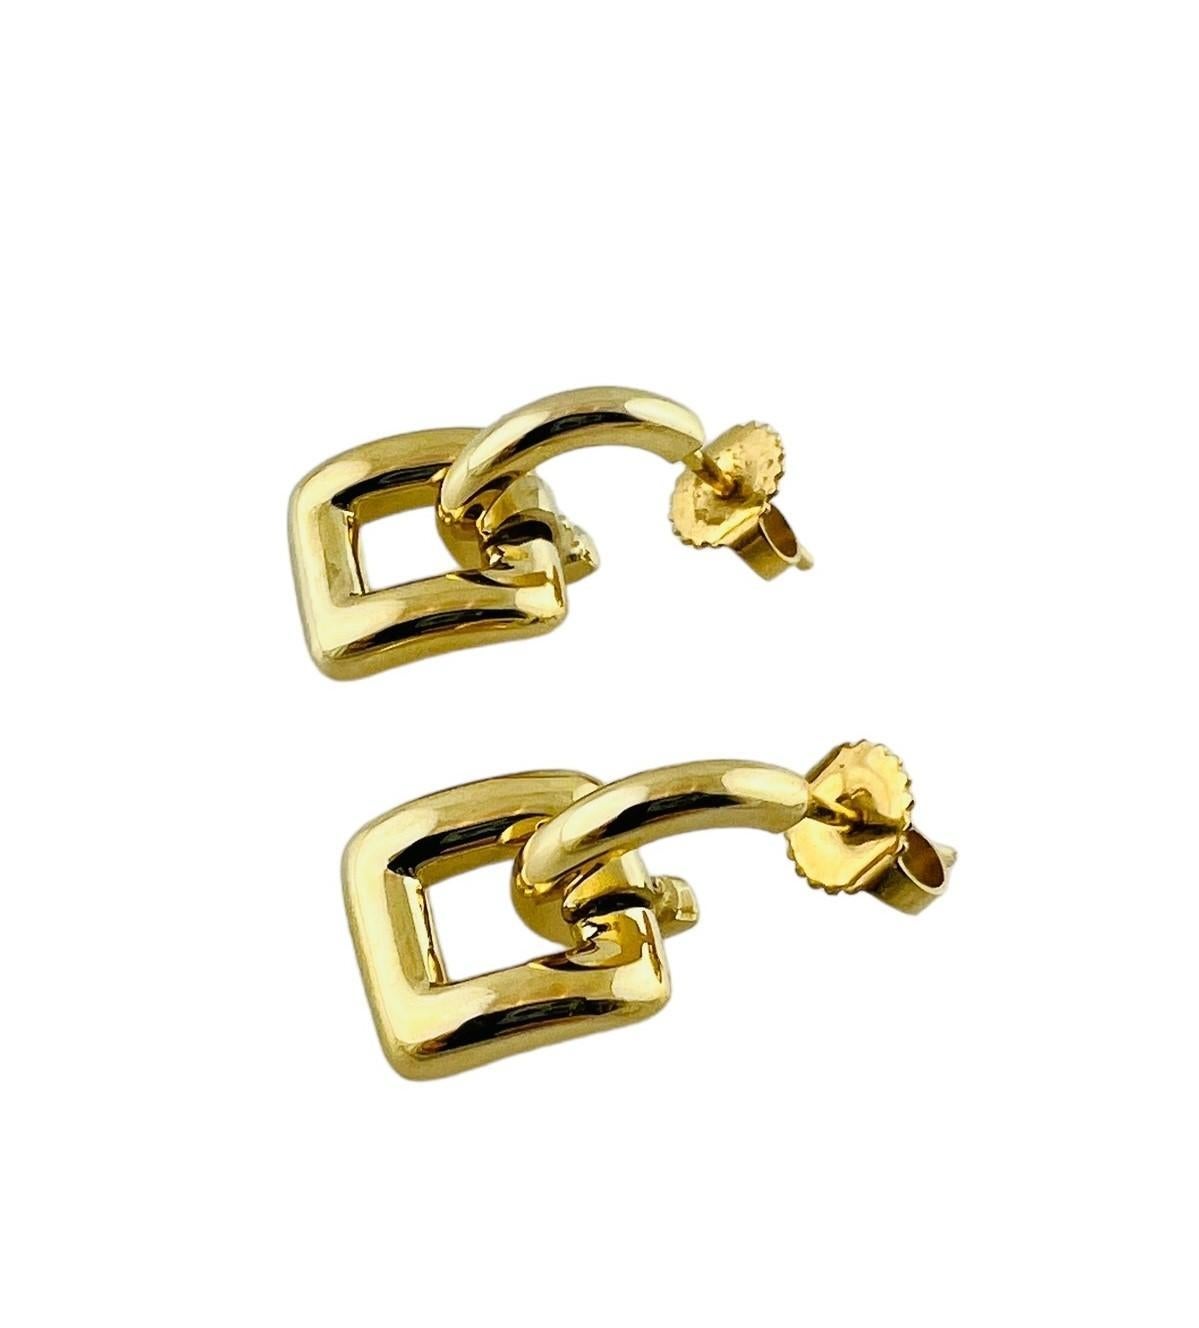 Vintage 2001 Tiffany & Co. 18K Yellow Gold Door Knocker Square Buckle Earrings

These door knocker style gold earrings by Tiffany & Co. are set in 18K yellow gold

Earrings are approx. 18 mm in length and 11 mm wide

Stamped 2001 T & Co. 750